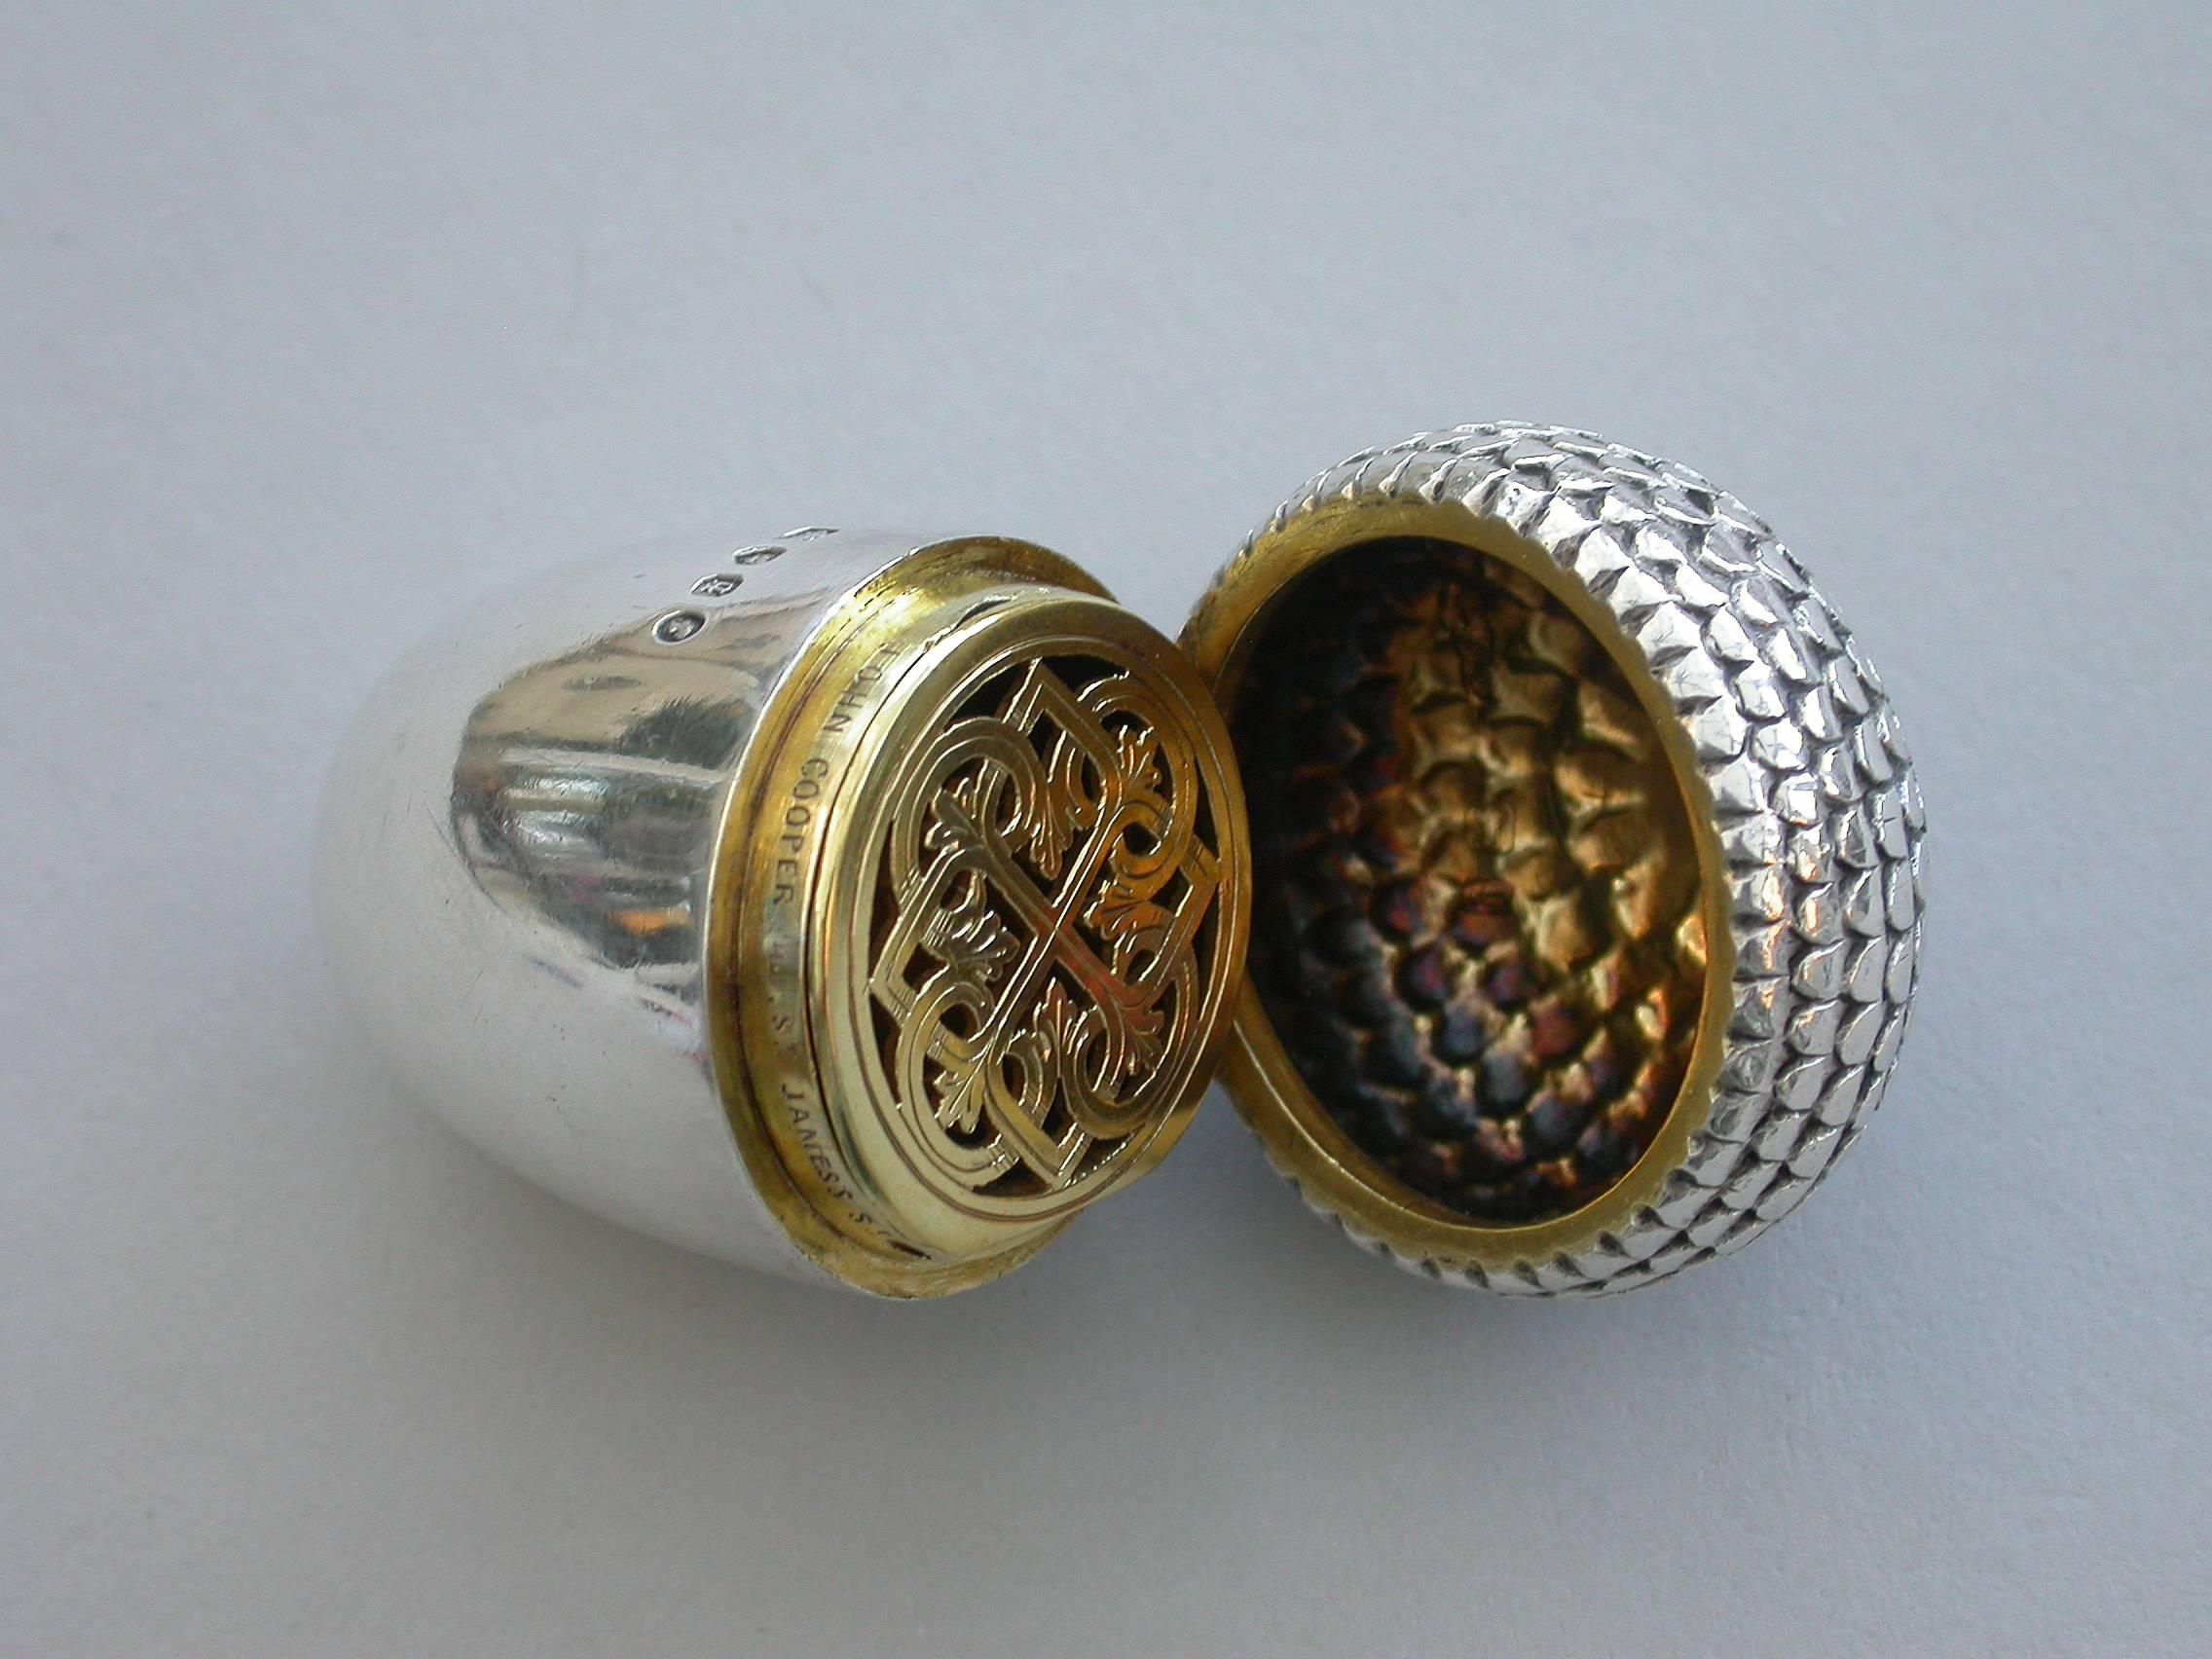 Late 19th Century Victorian Novelty Silver Acorn Vinaigrette by Henry William Dee, London, 1871